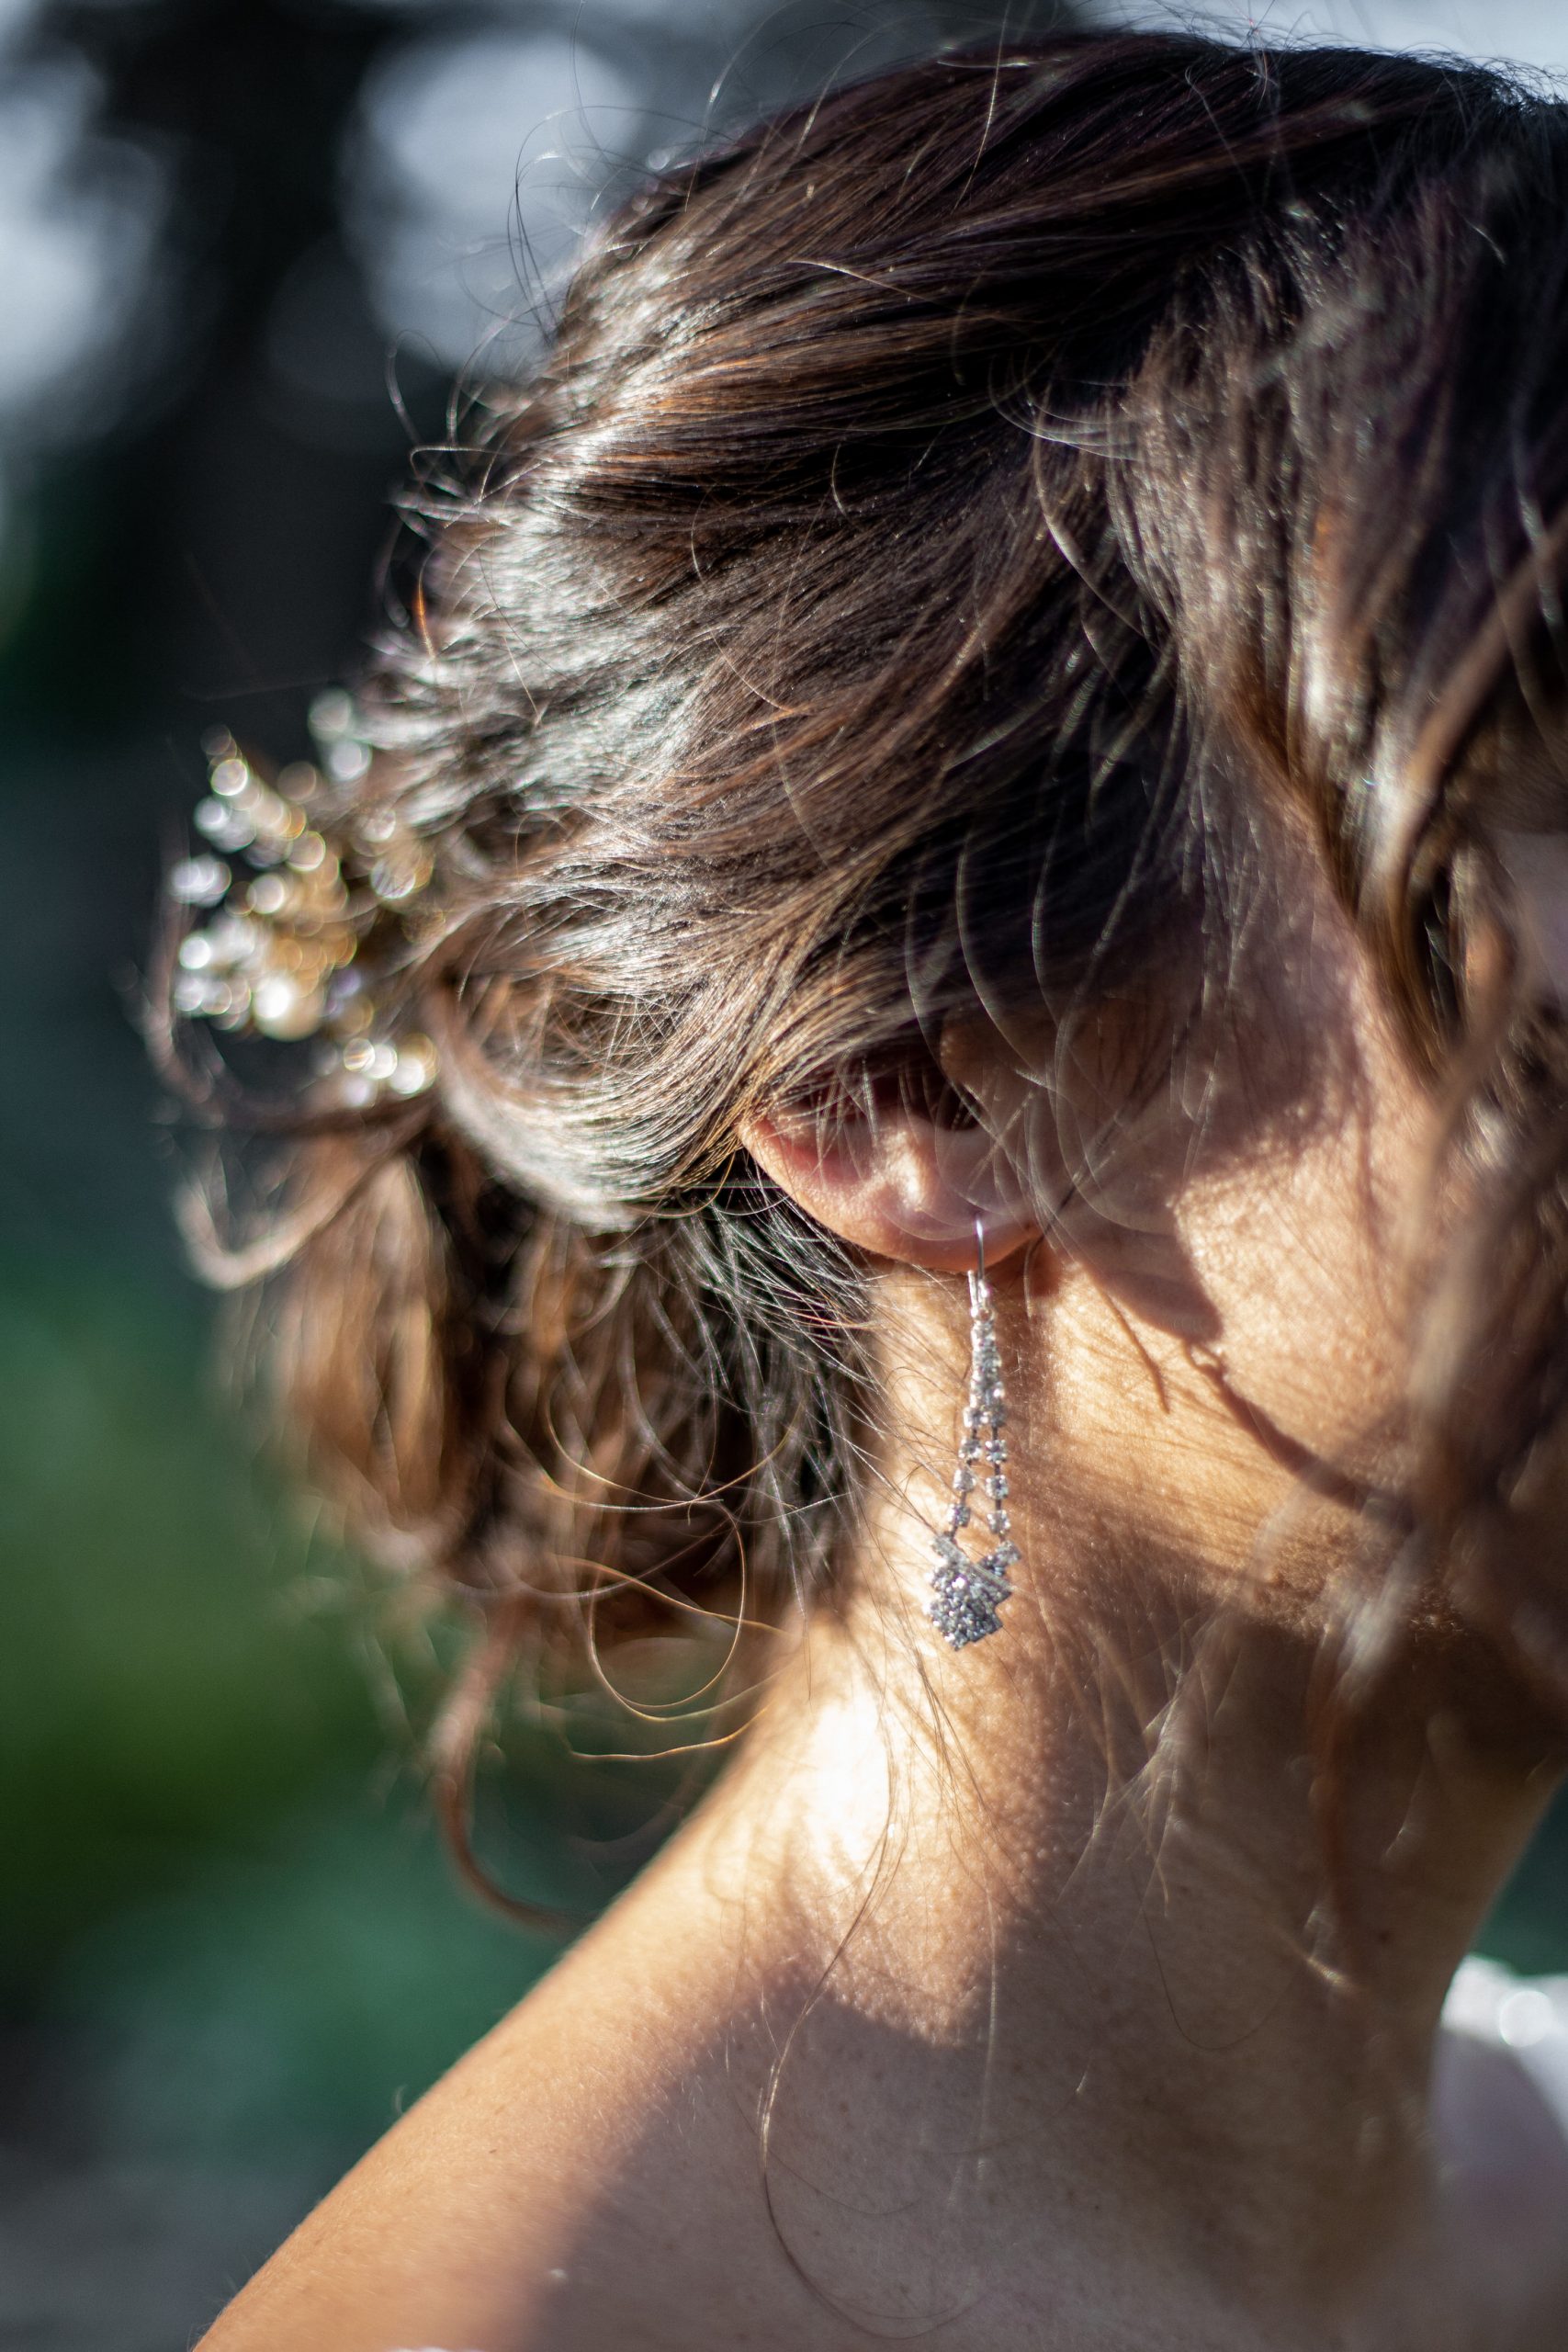 Detaisl of a brides hair and jewelry.